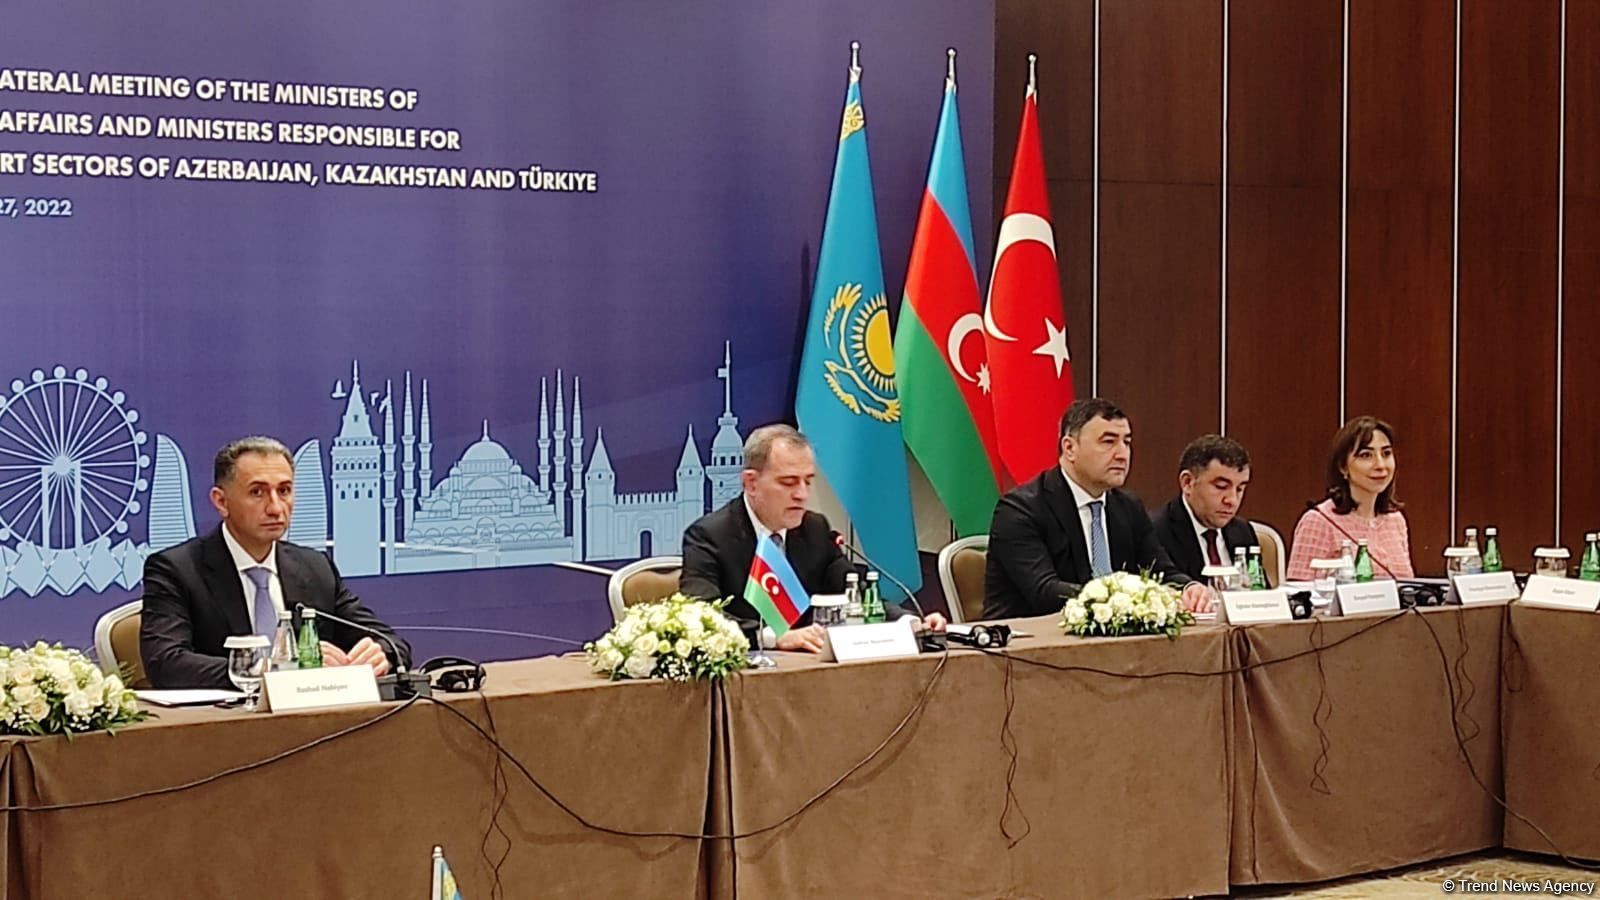 Meeting of Azerbaijani, Turkish and Kazakh FMs serving to ensure security of region – FM [PHOTO]